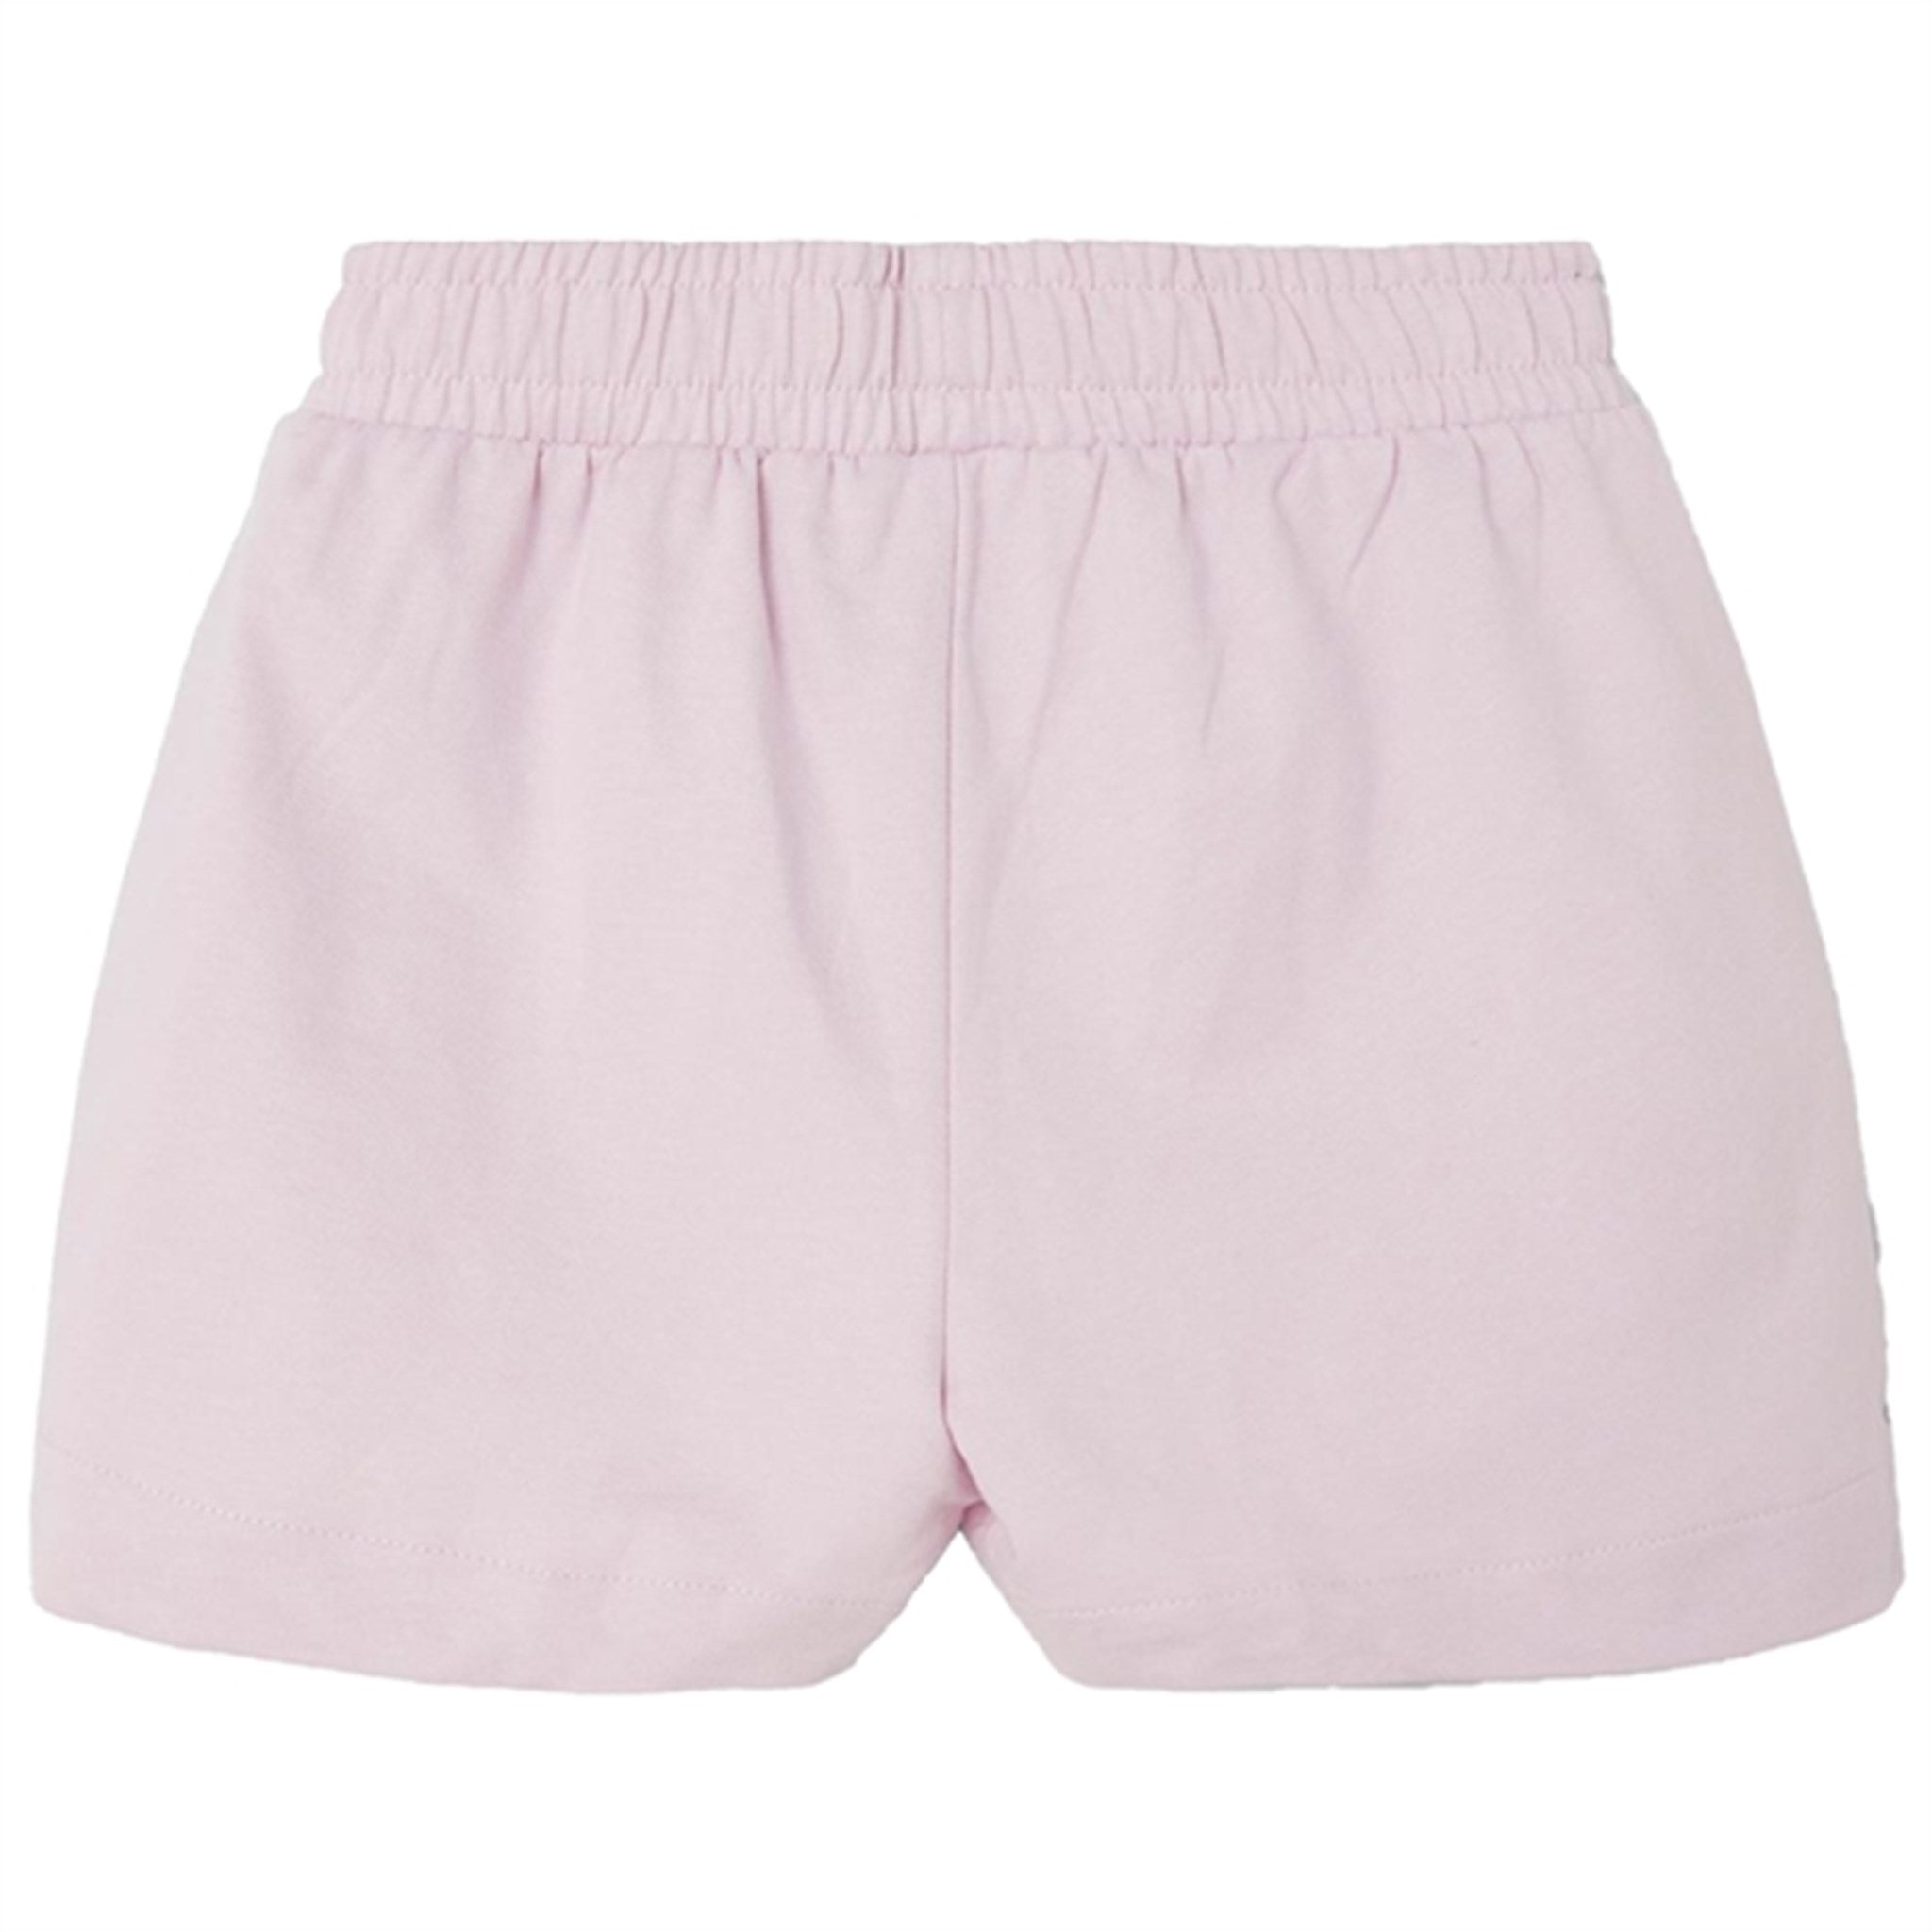 Name it Winsome Orchid Nukka Sweat Shorts 3